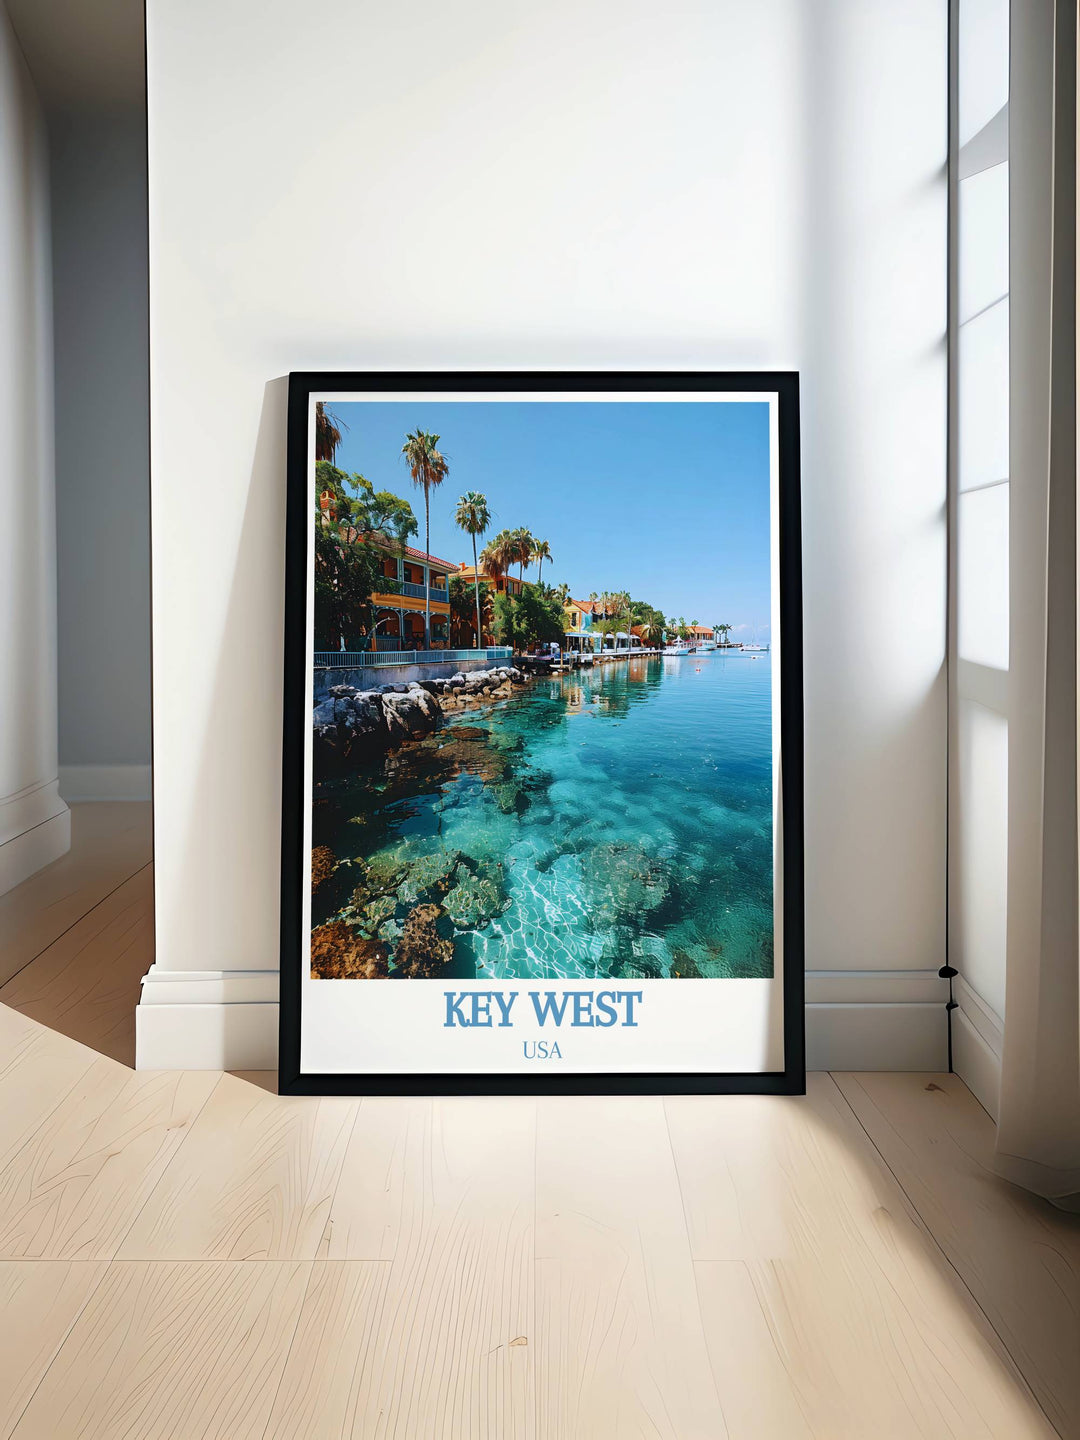 Stunning Florida Artwork featuring the vibrant Key West Historic Seaport bringing the lively waterfront and colorful boats into your home perfect for enhancing your Florida Decor.